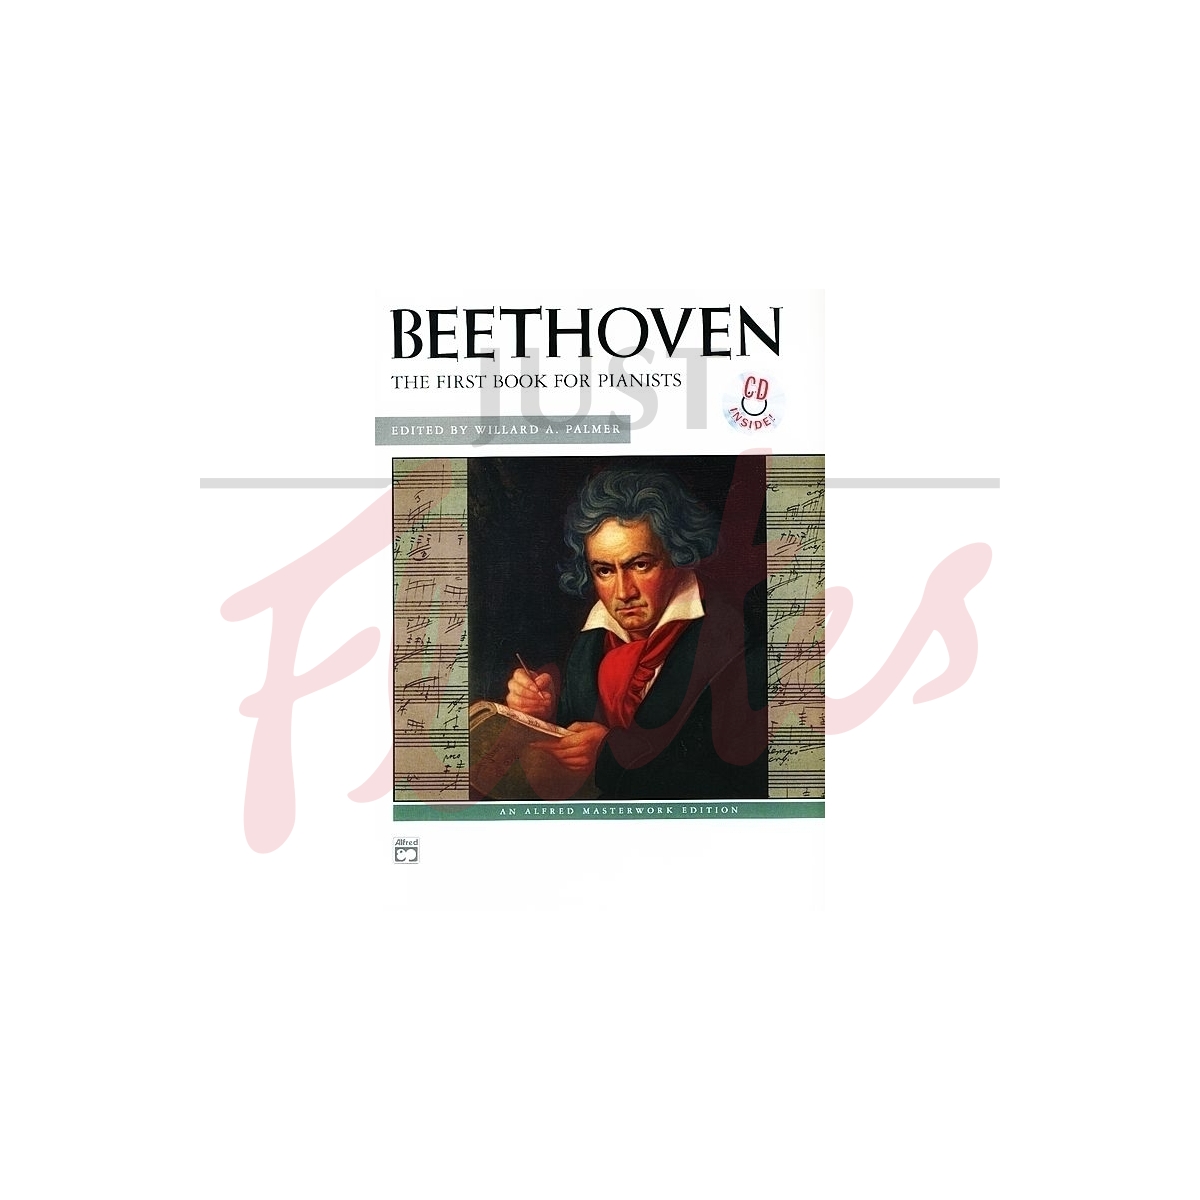 Beethoven: The First Book for Pianists